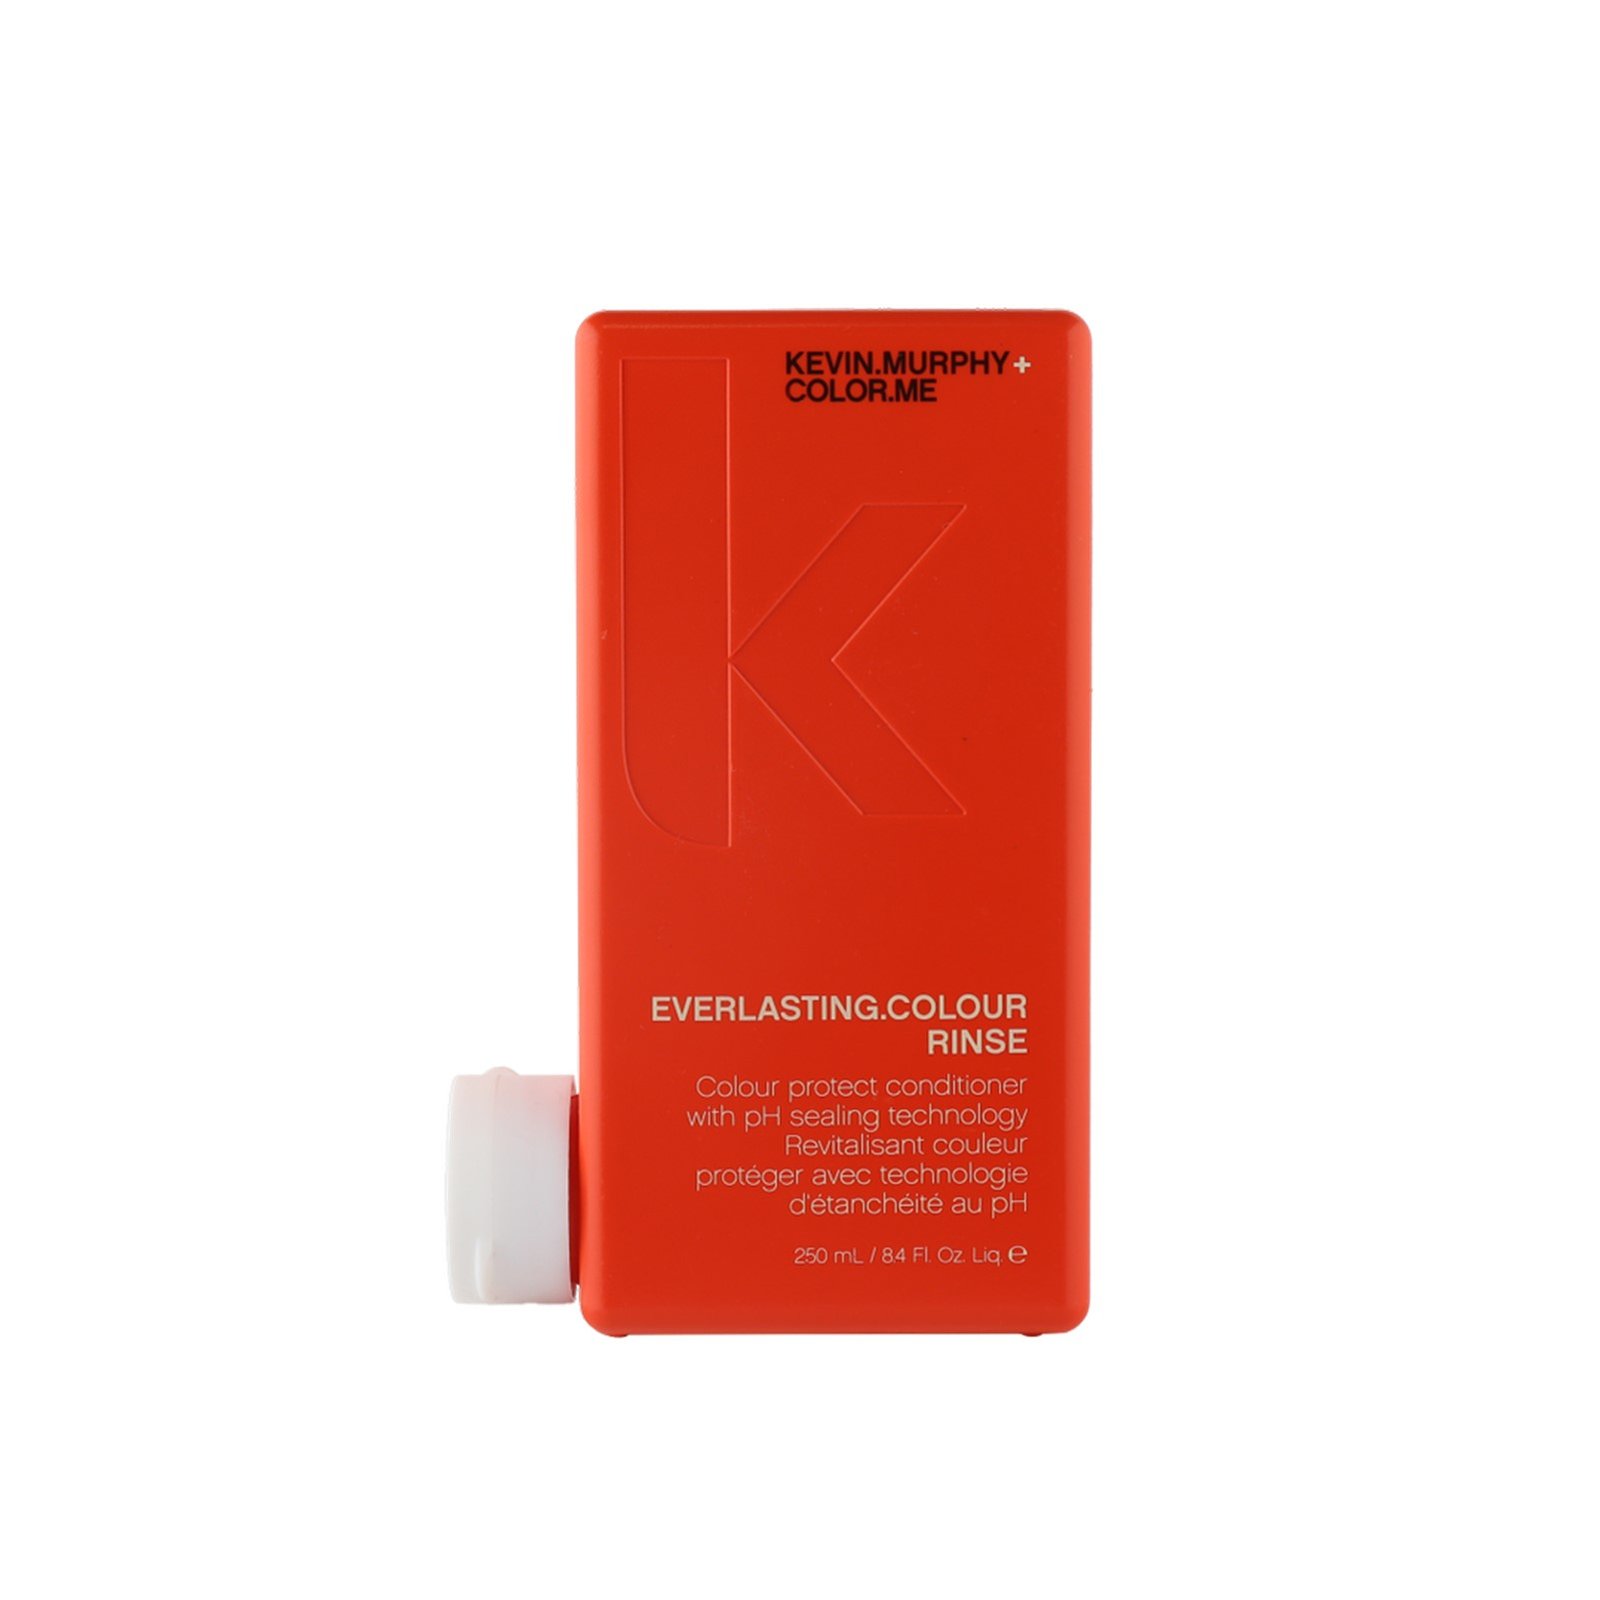 Kevin Murphy Everlasting Colour Rinse Conditioner 250ml